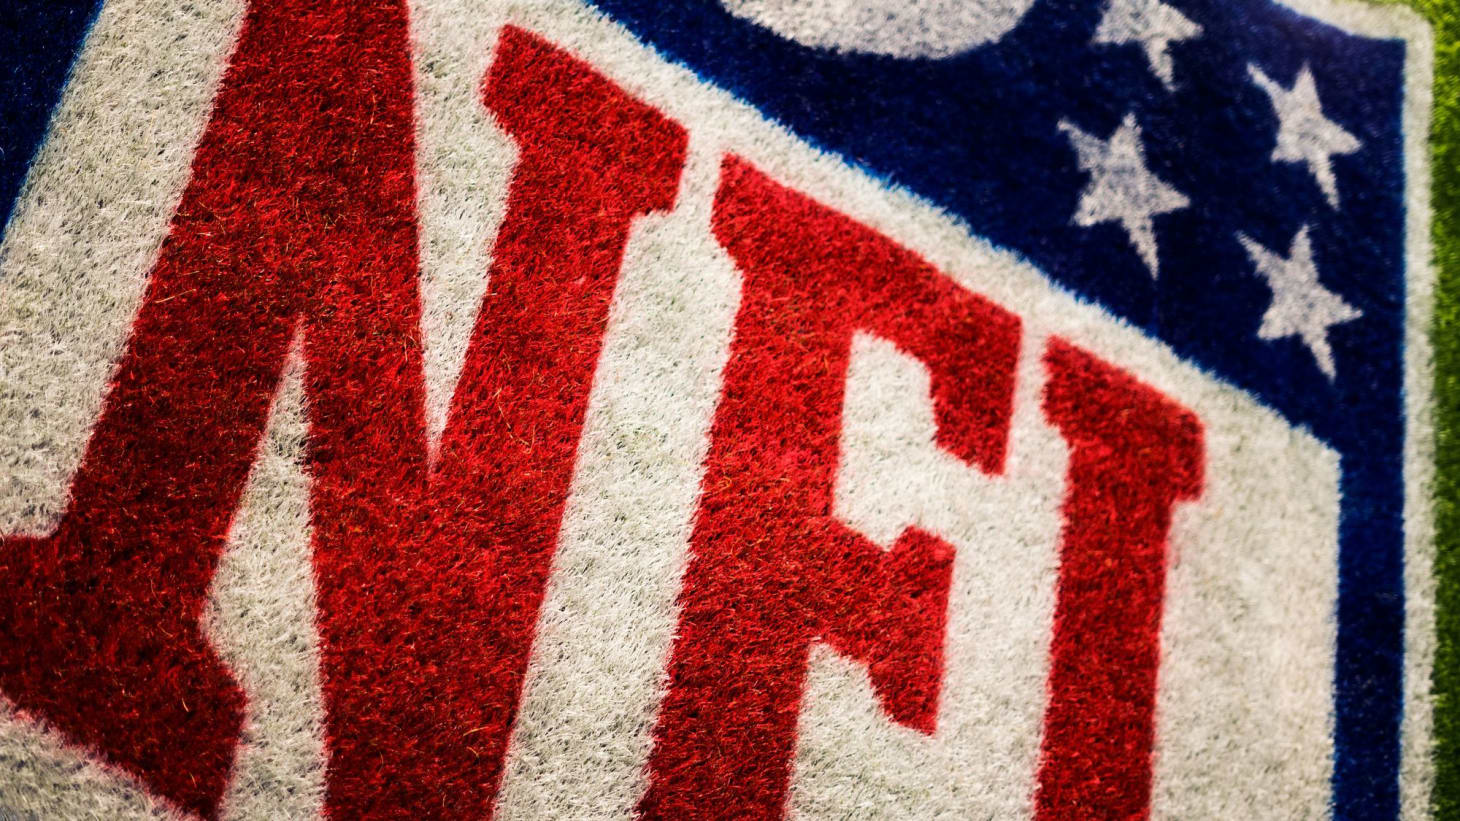 NFL on Paramount+, One Week Free-Trial + Showtime